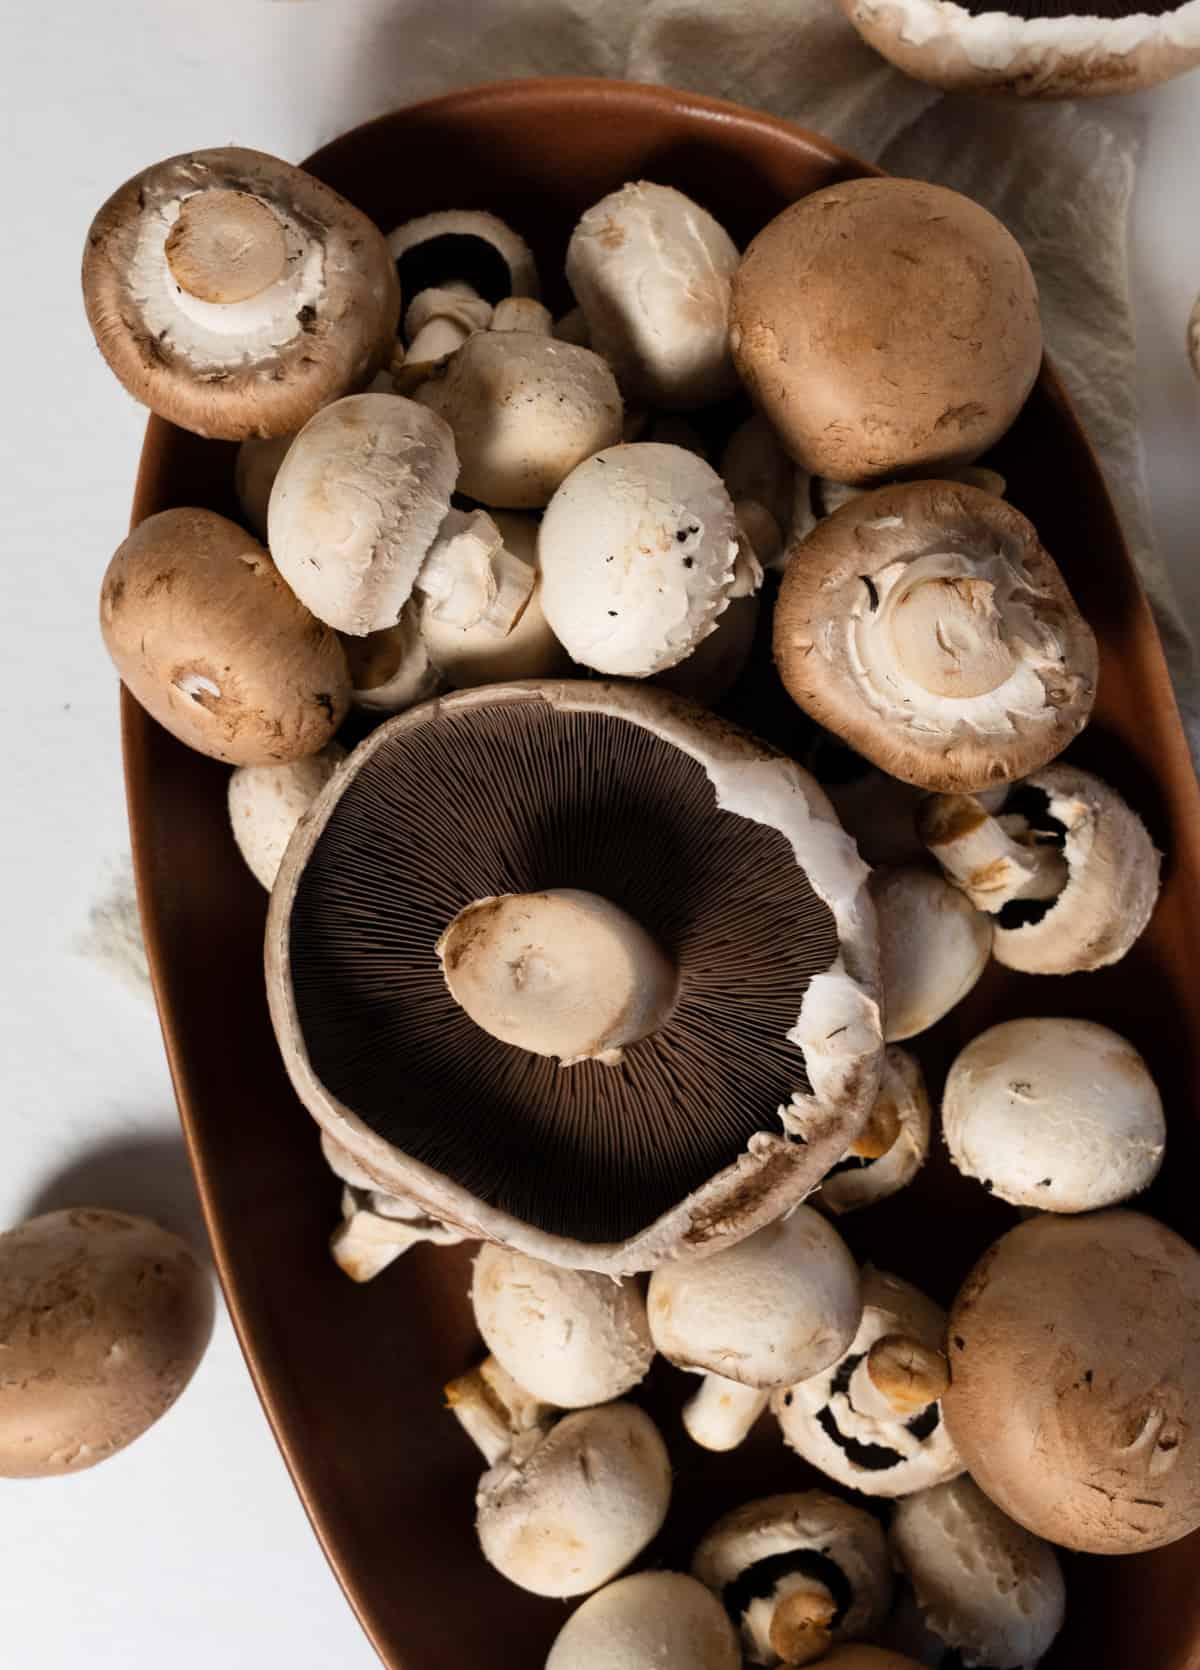 white and brown mushrooms in a bowl